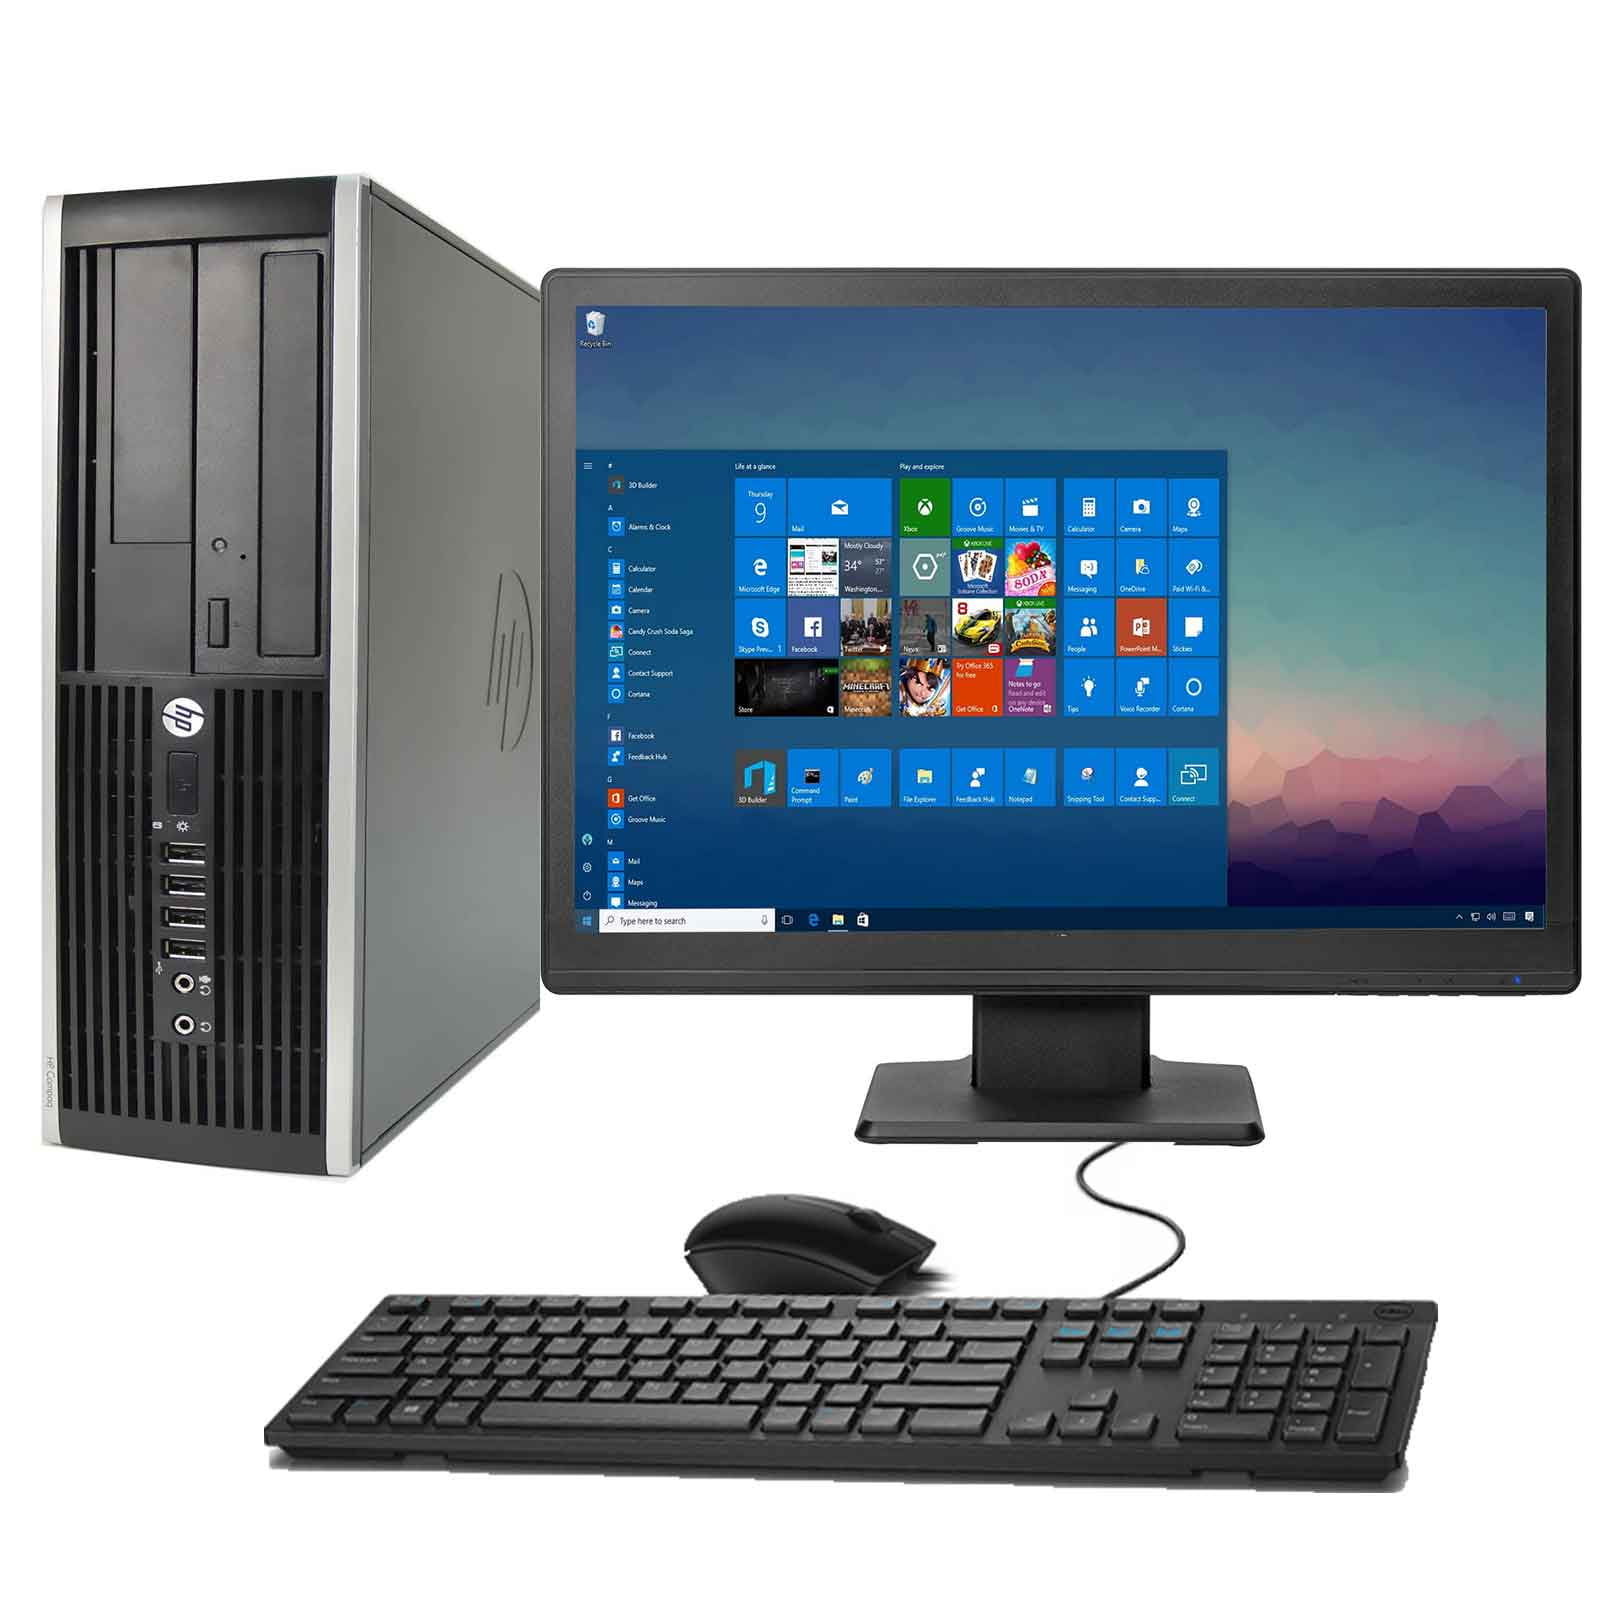 HP 8200 Elite Desktop Computer with Windows 10 PRO Intel Quad Core i5 3.1 GHz Processor 8GB RAM 1TB Hard Drive DVD WiFi Adapter 19&quot; Monitor Keyboard and Mouse v